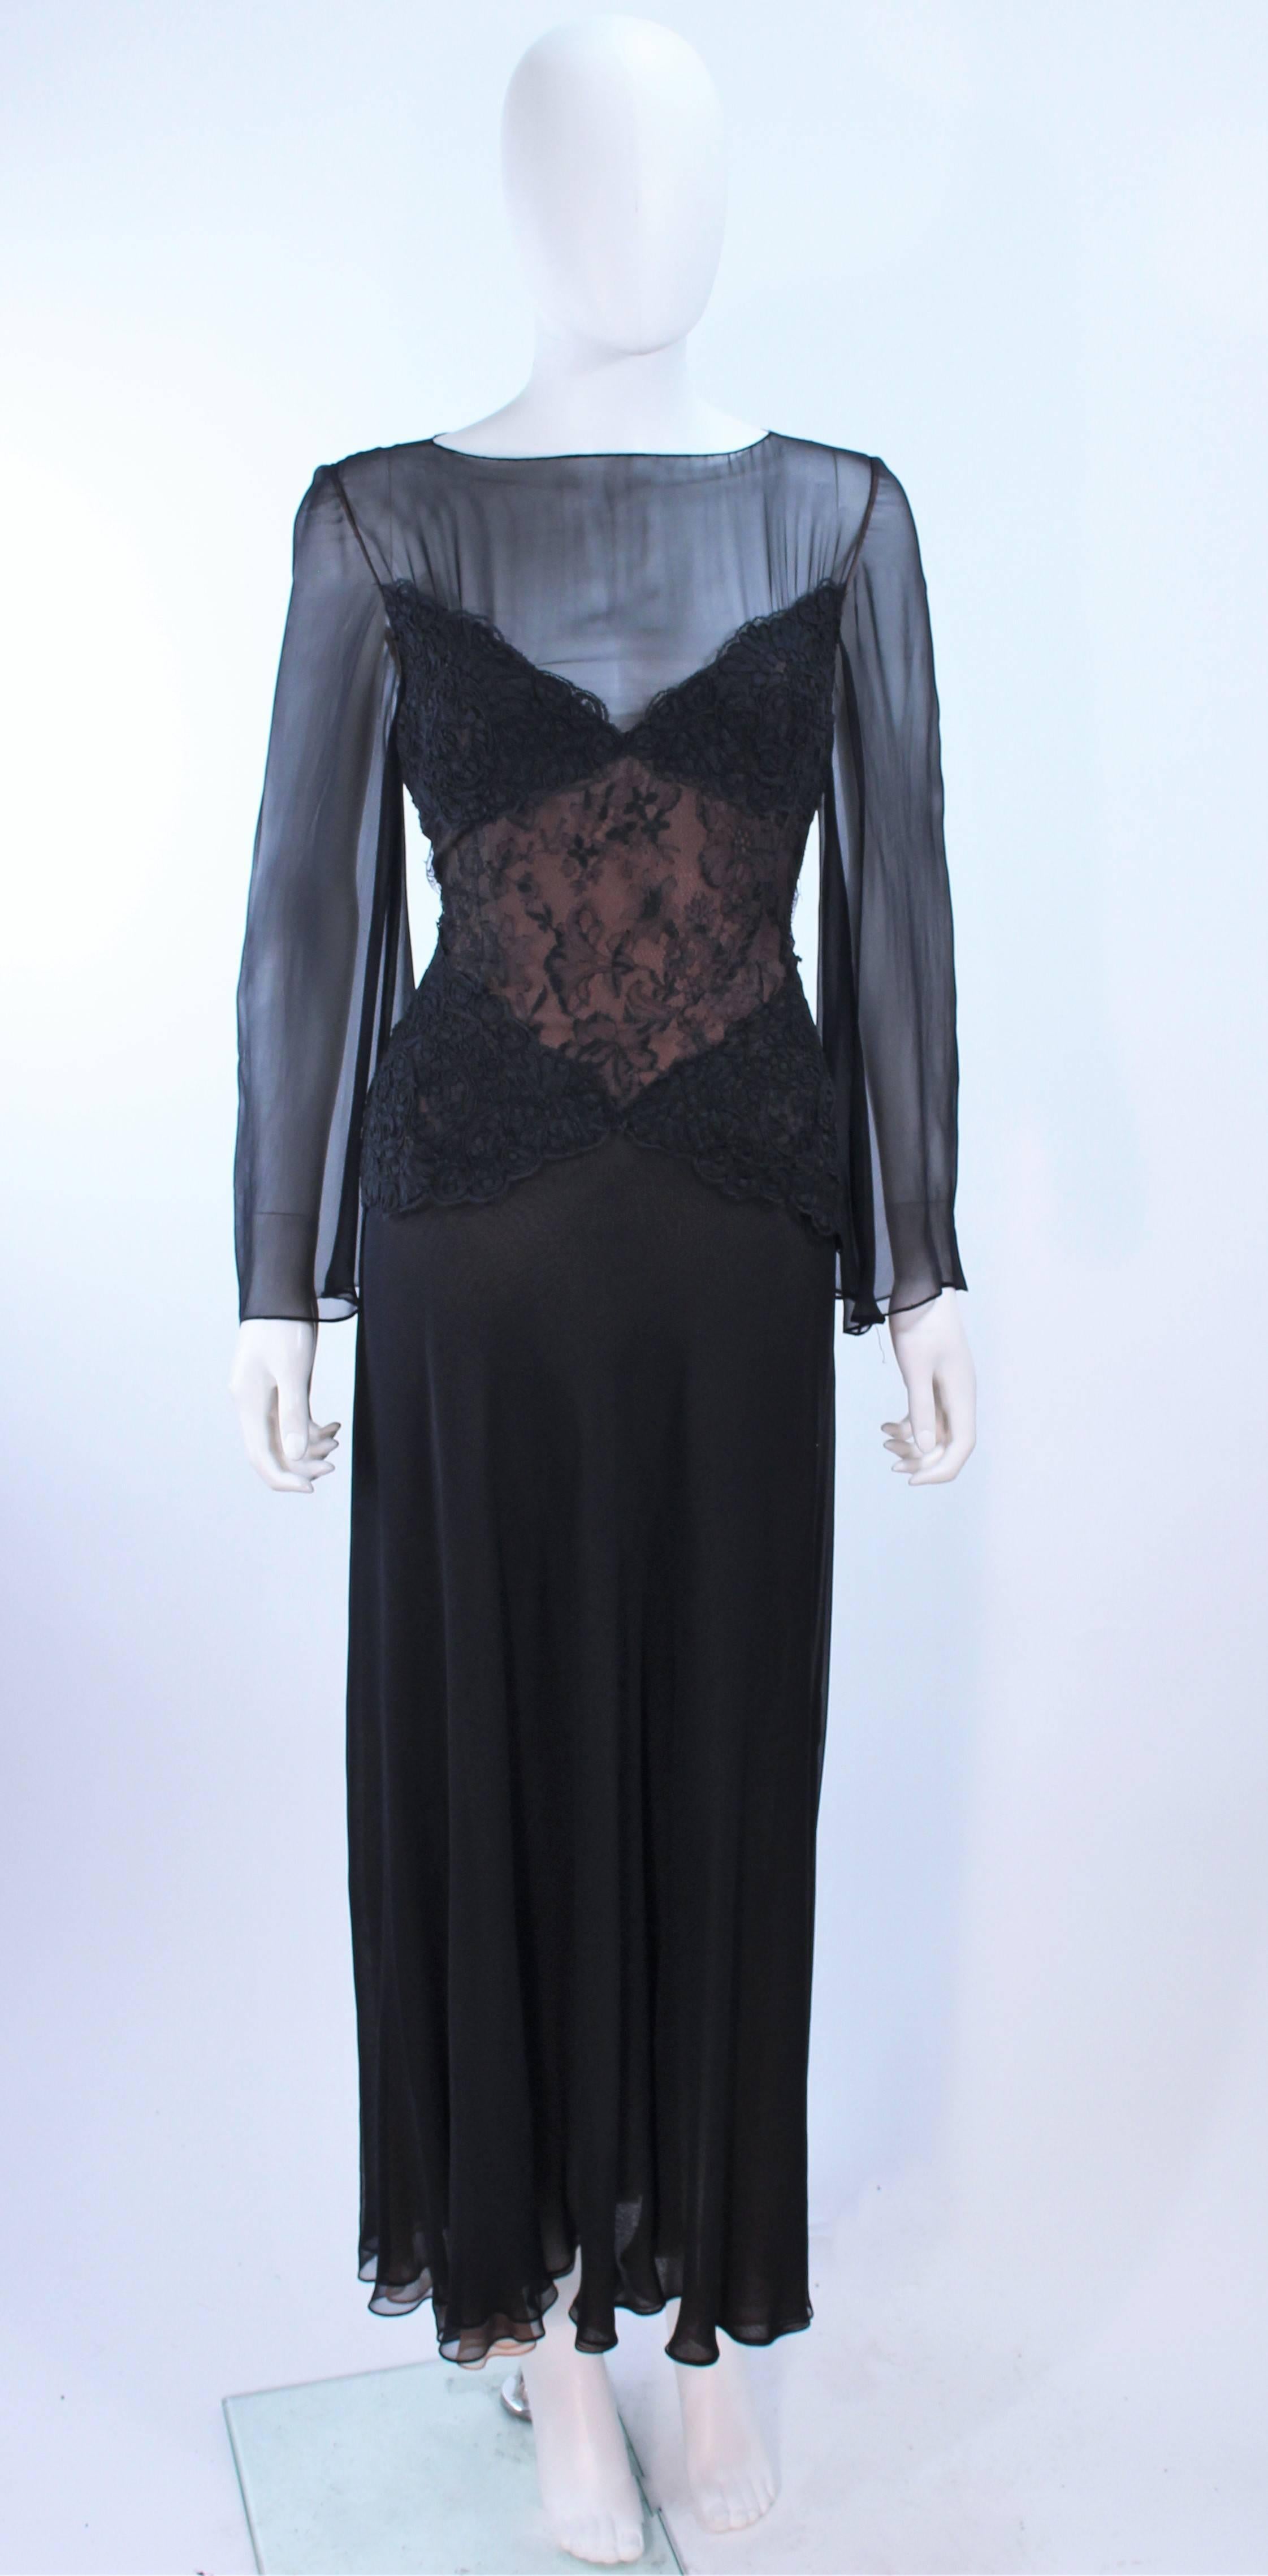 This Bill Blass gown is composed of a black silk chiffon with lace applique and nude underlay. Features sheer sleeves. There is a side zipper closure. In excellent vintage condition.

**Please cross-reference measurements for personal accuracy.